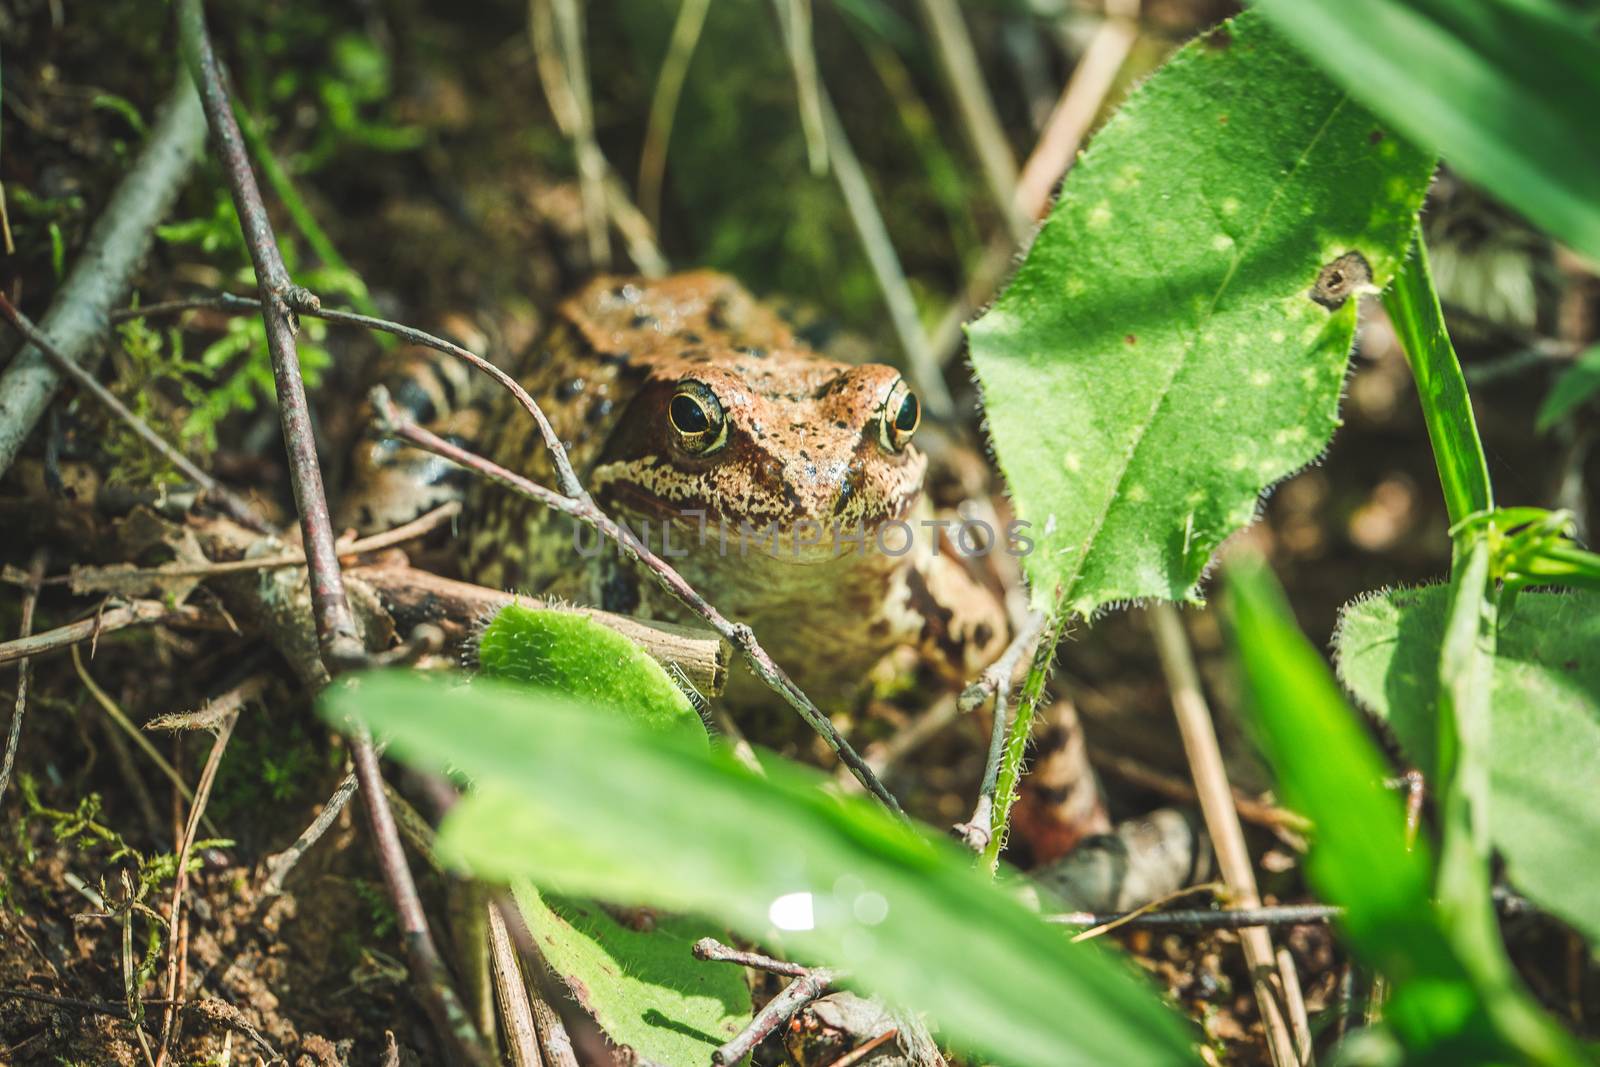 brown frog on vacation in the nature in the woods